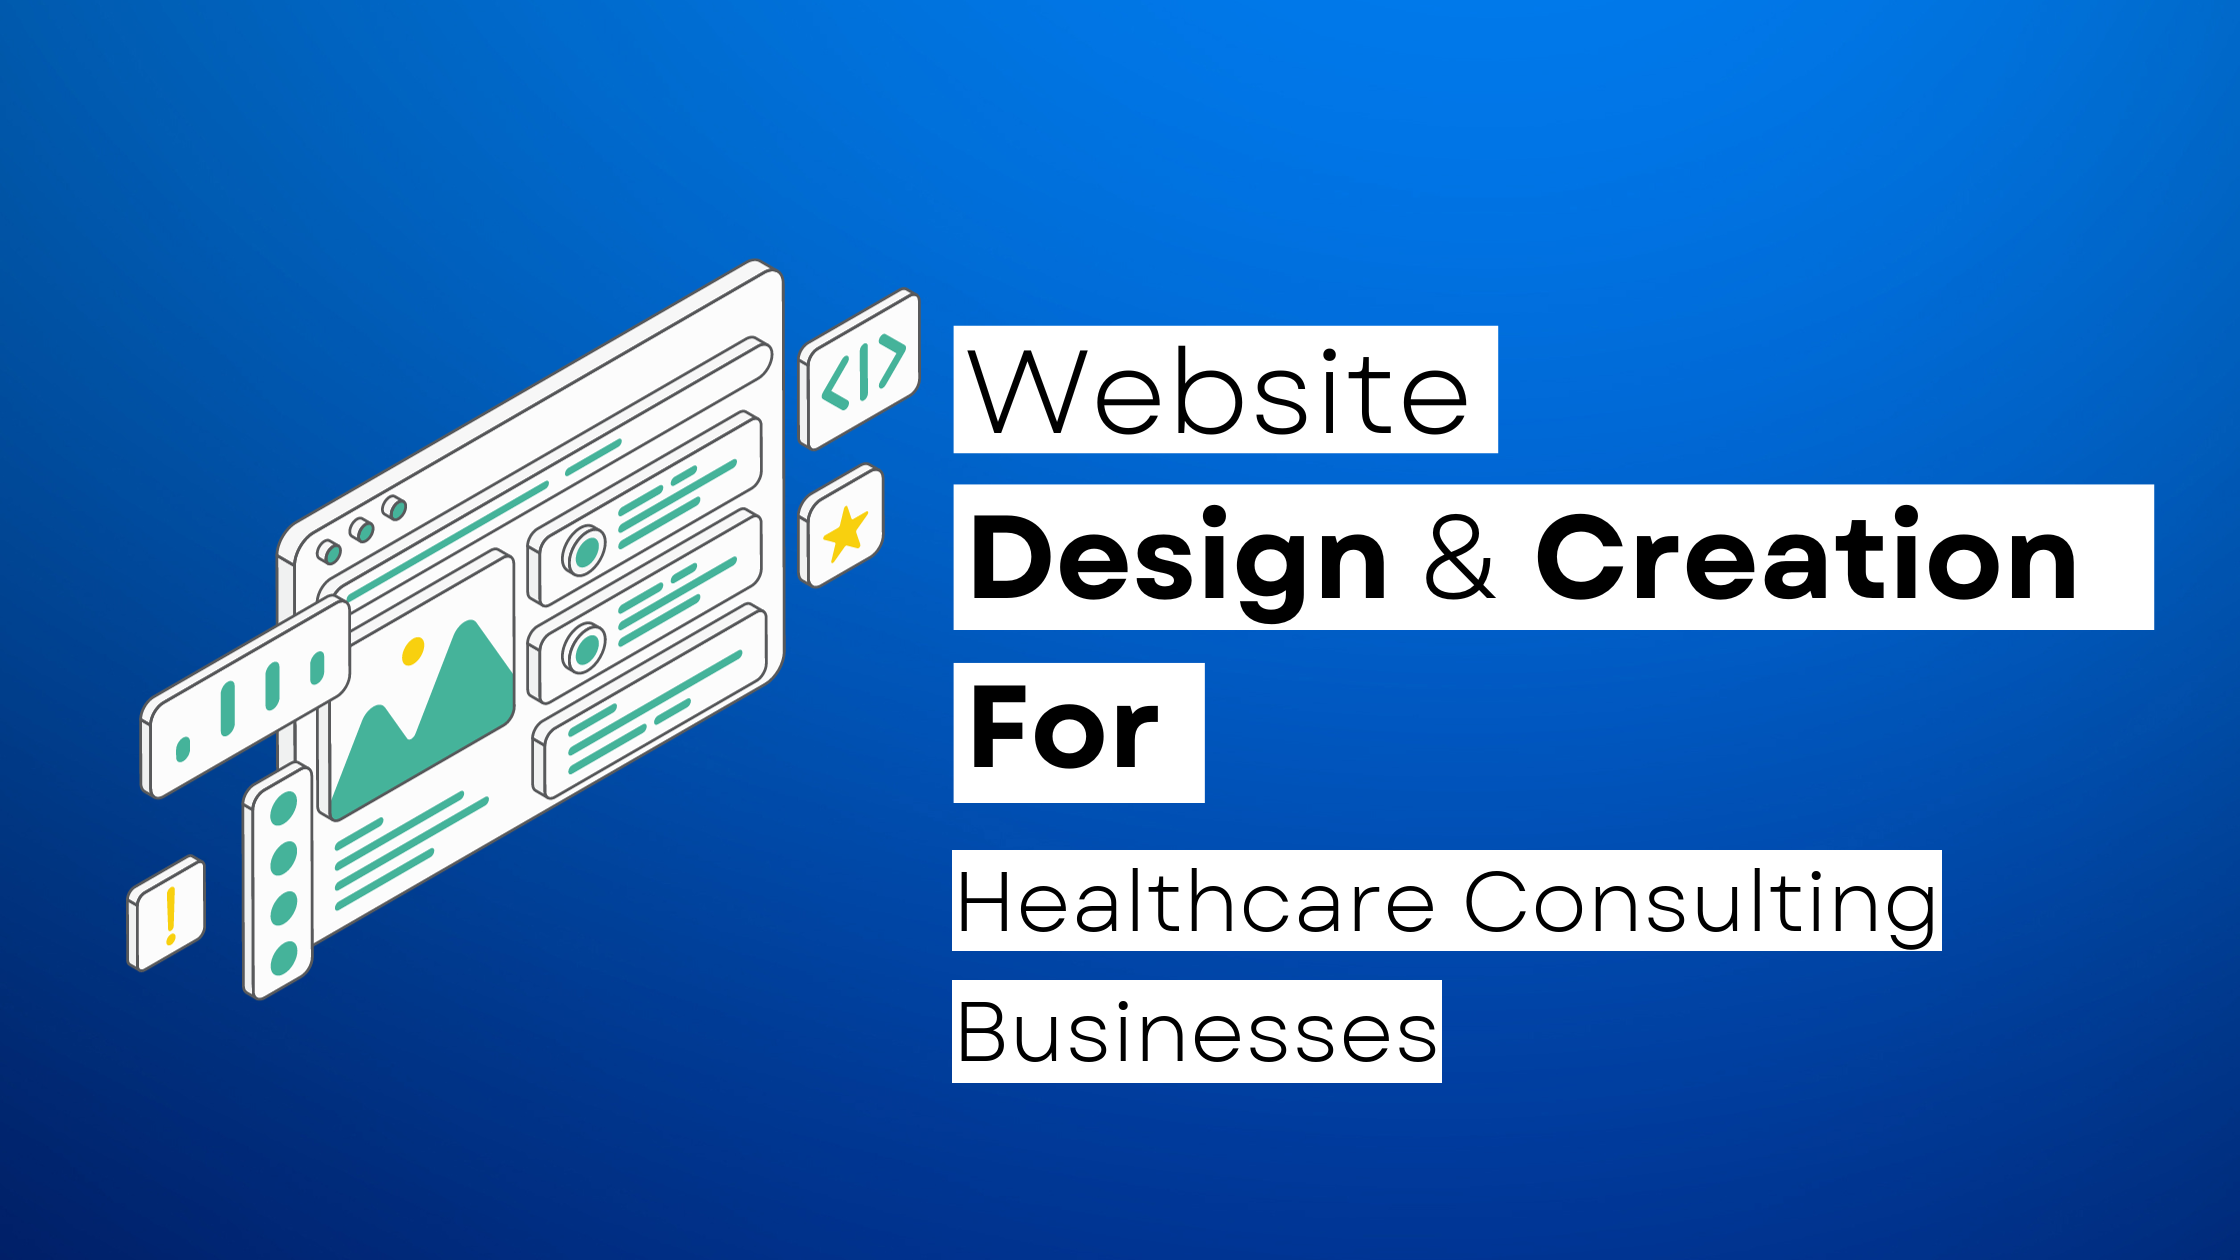 How to start a Healthcare Consulting website